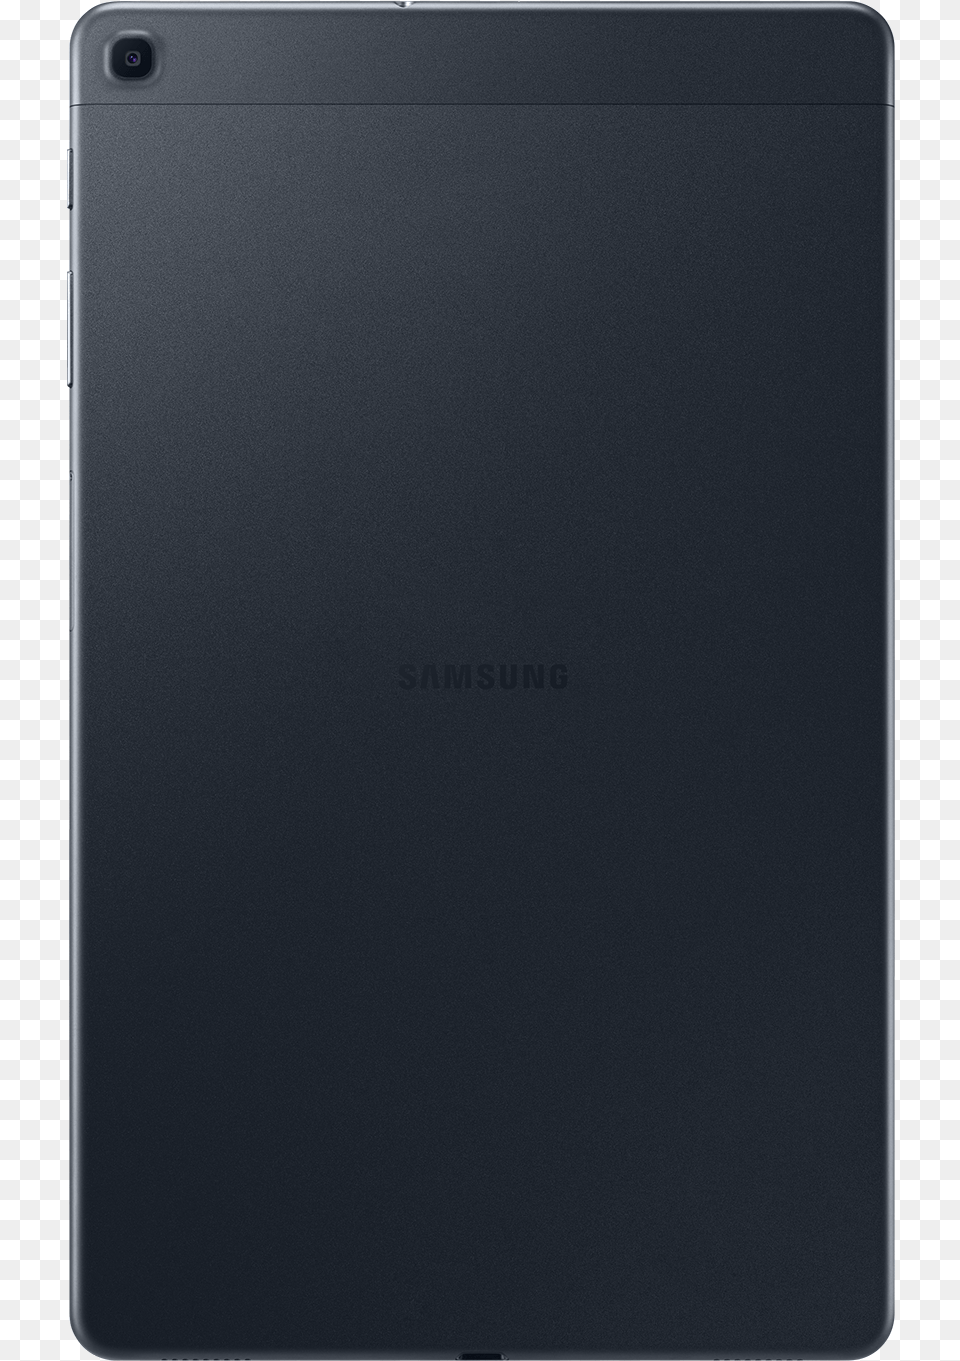 Samsung Tab T515 Black, Electronics, Mobile Phone, Phone, Computer Png